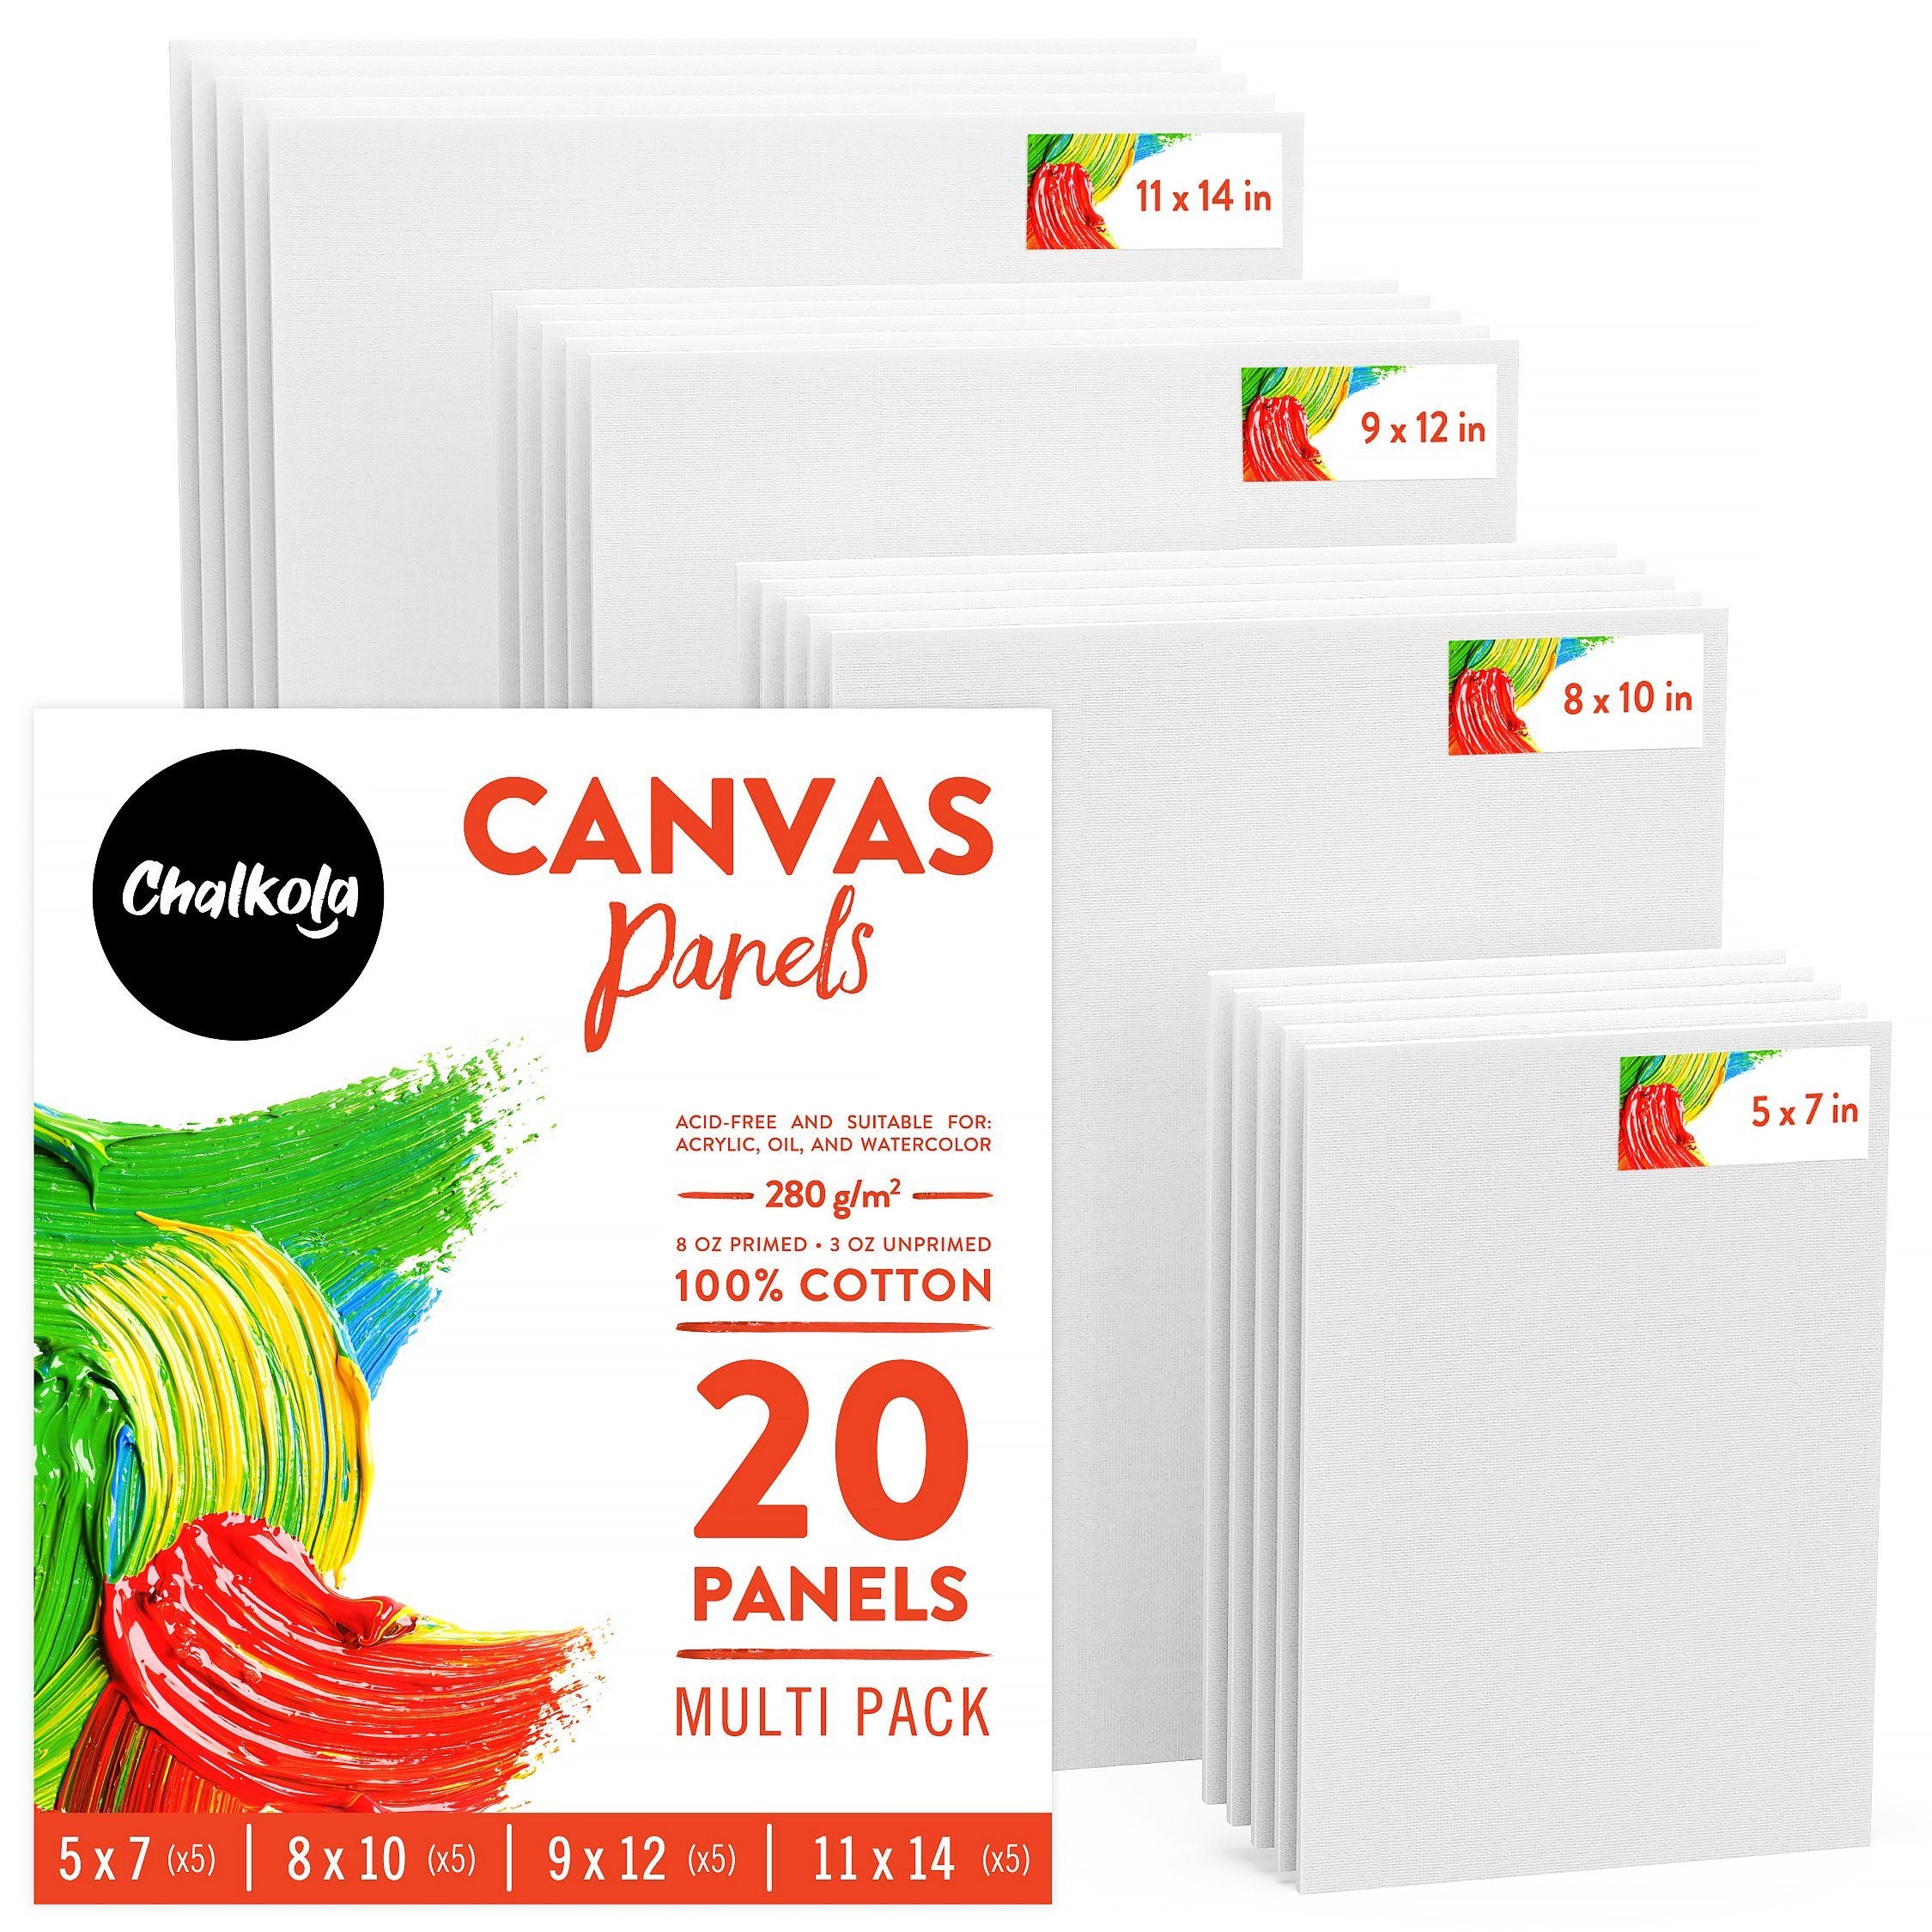  PHOENIX Watercolor Canvases For Painting - 12 Pack Panels  Multipack